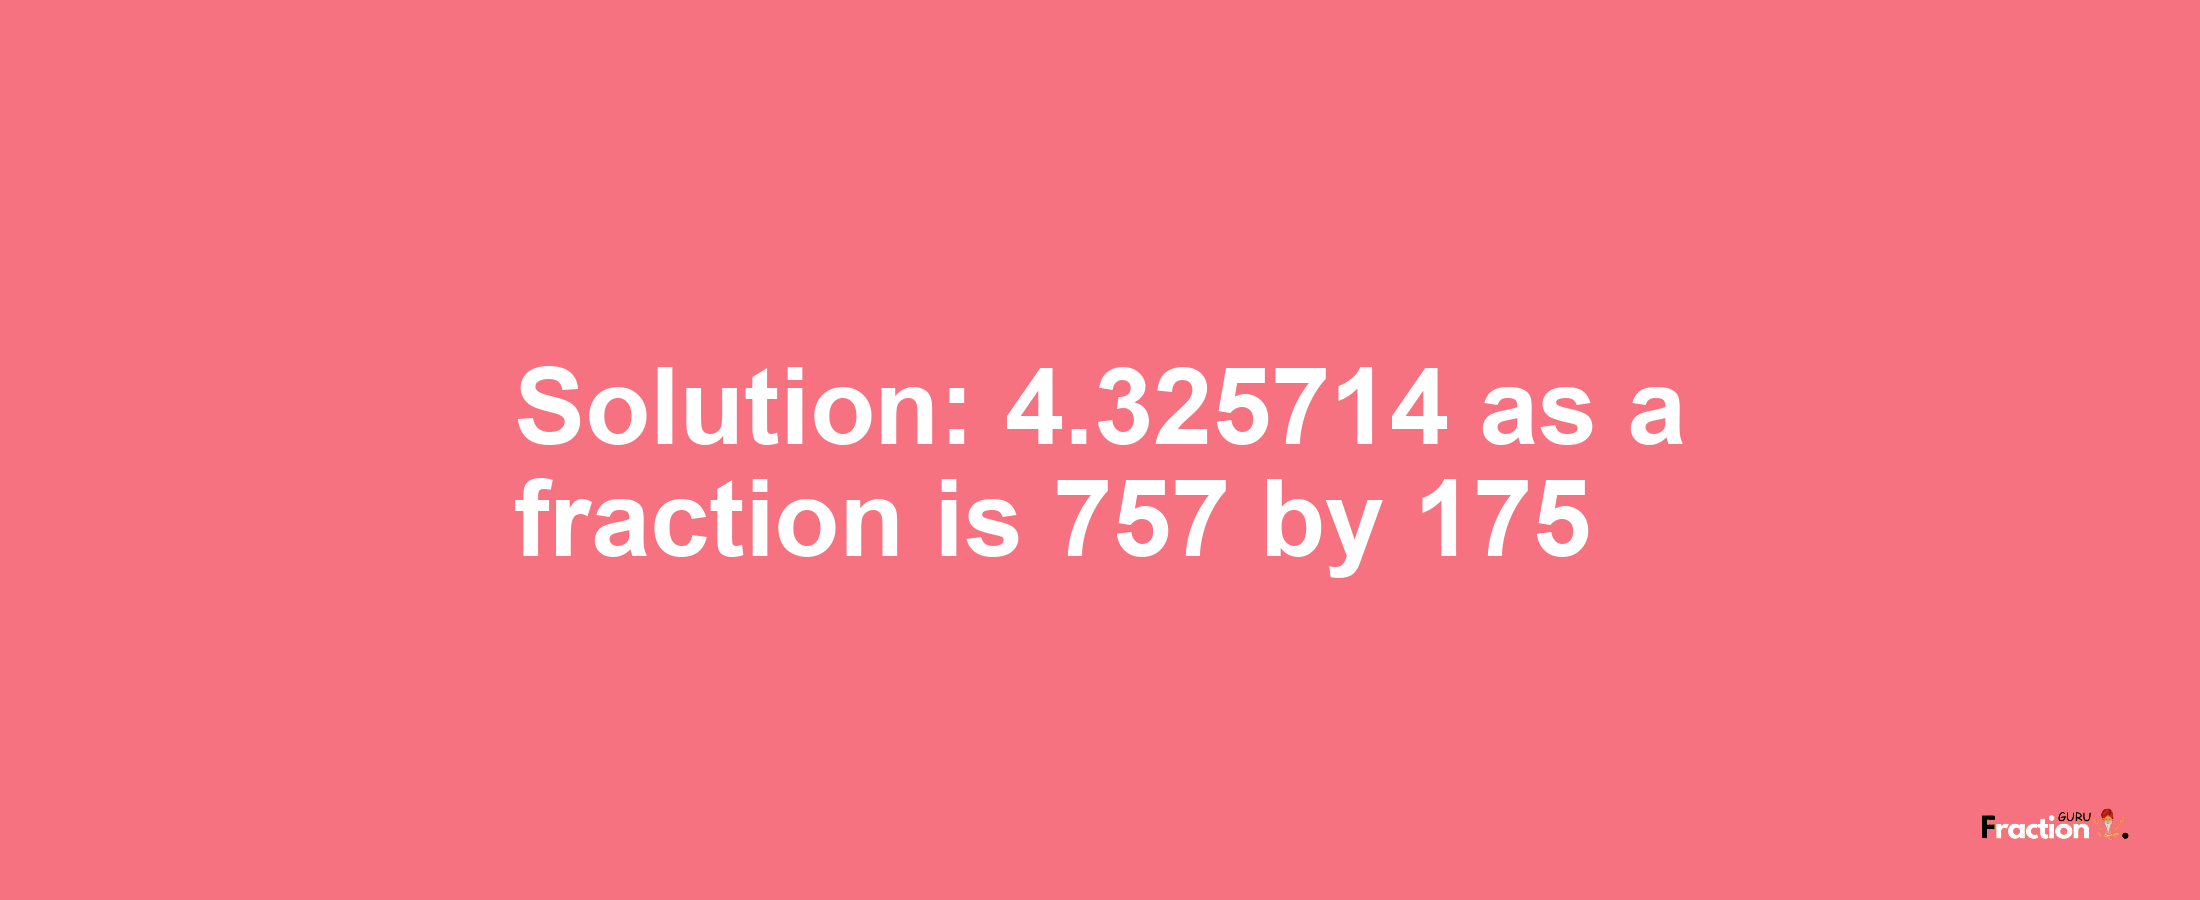 Solution:4.325714 as a fraction is 757/175